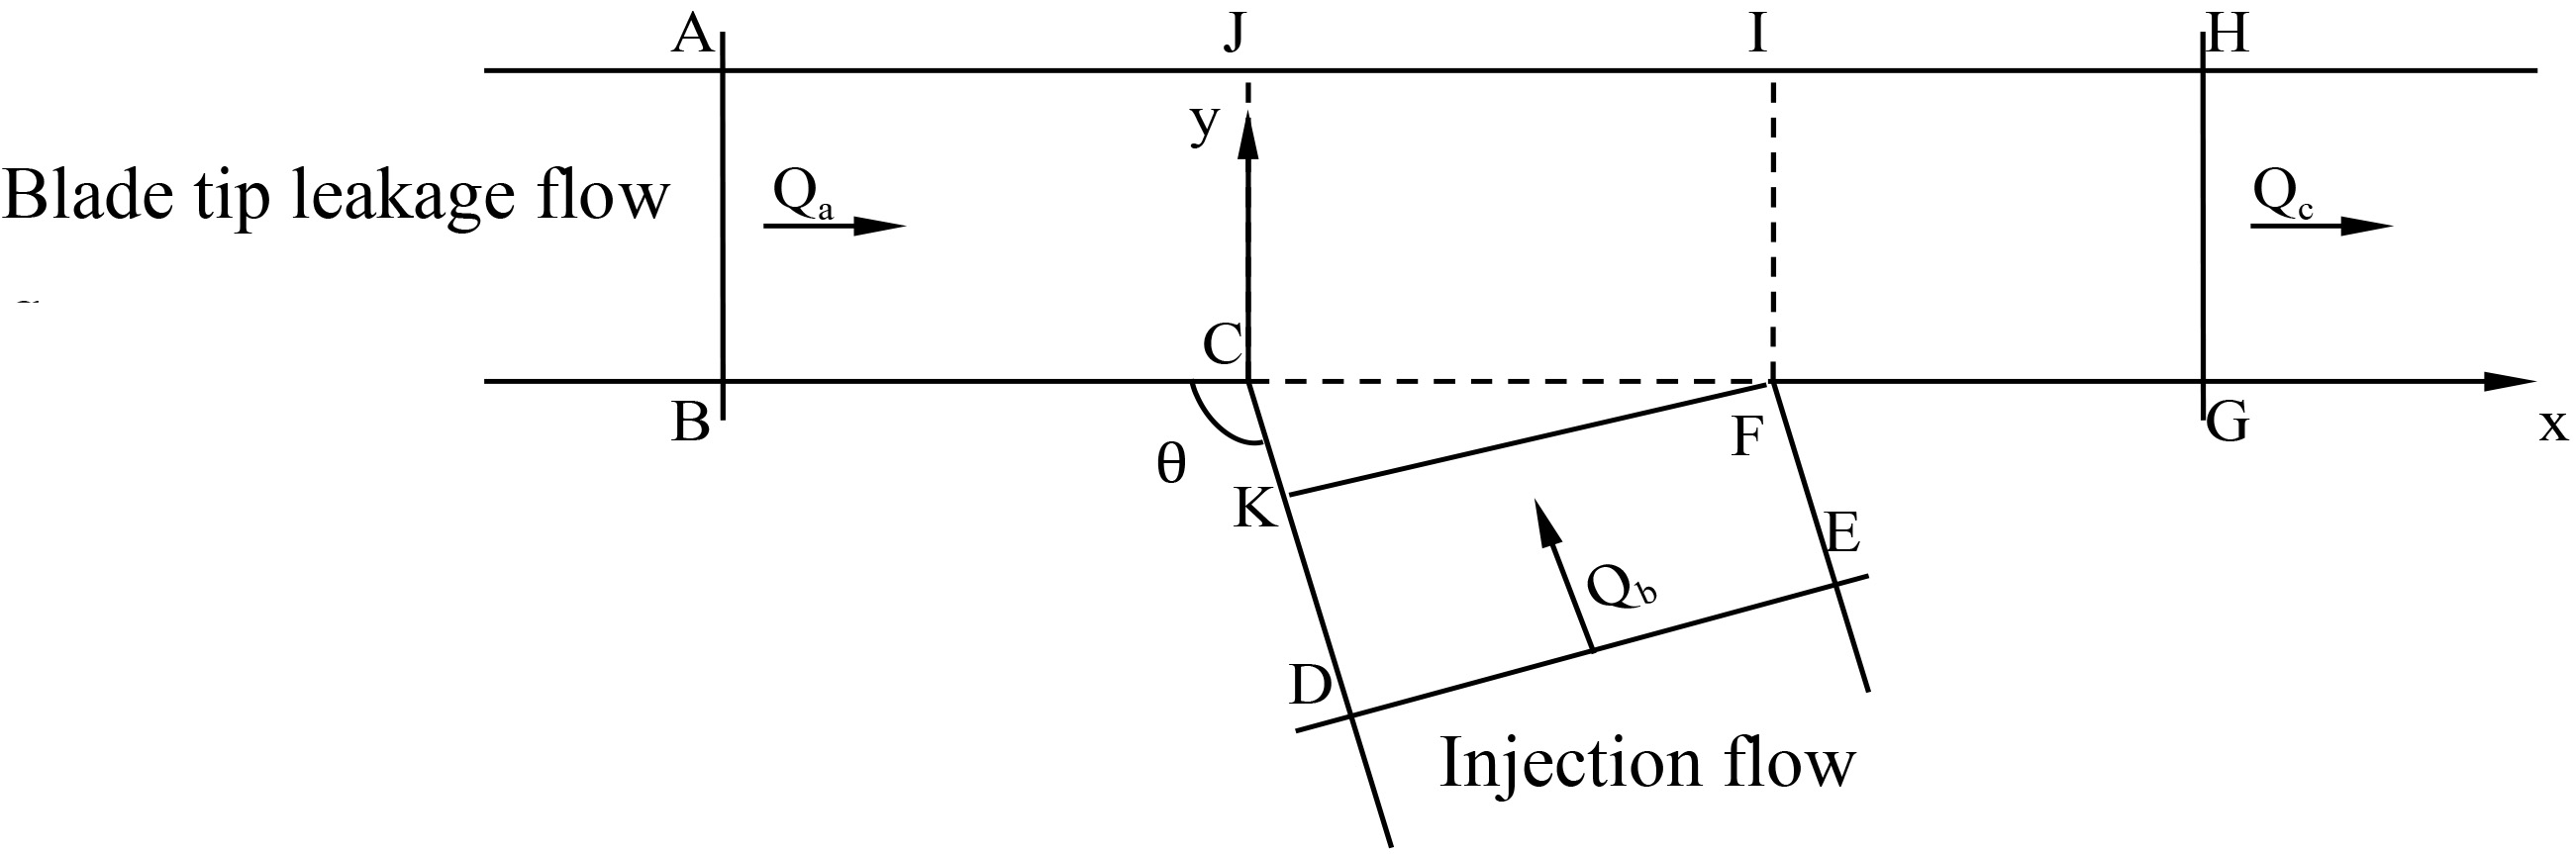 Two-dimensional analysis of region around the outlet of injection channel.